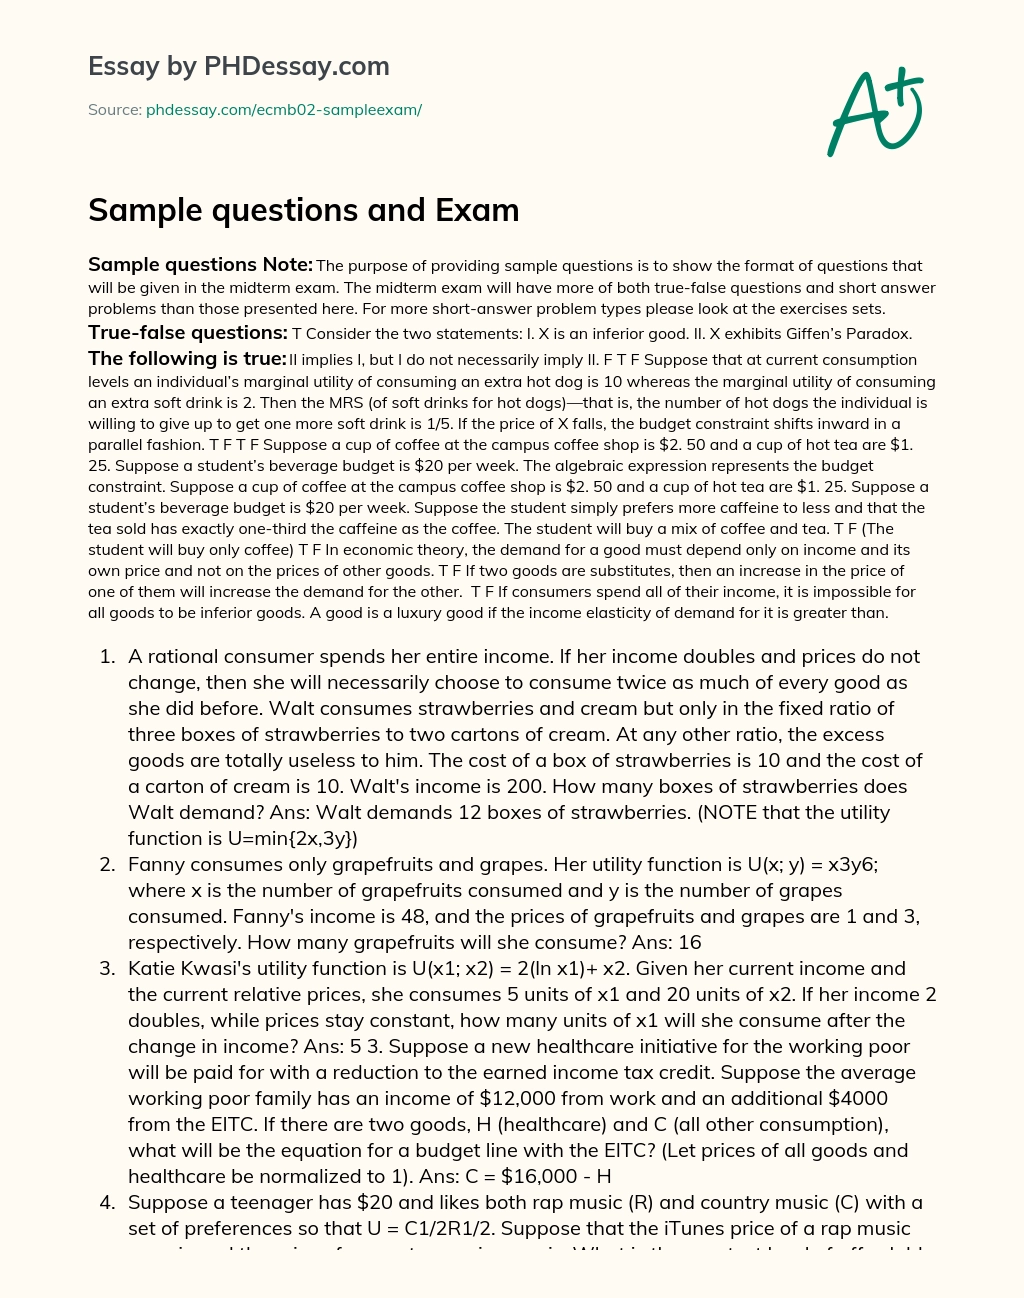 Sample questions and Exam essay